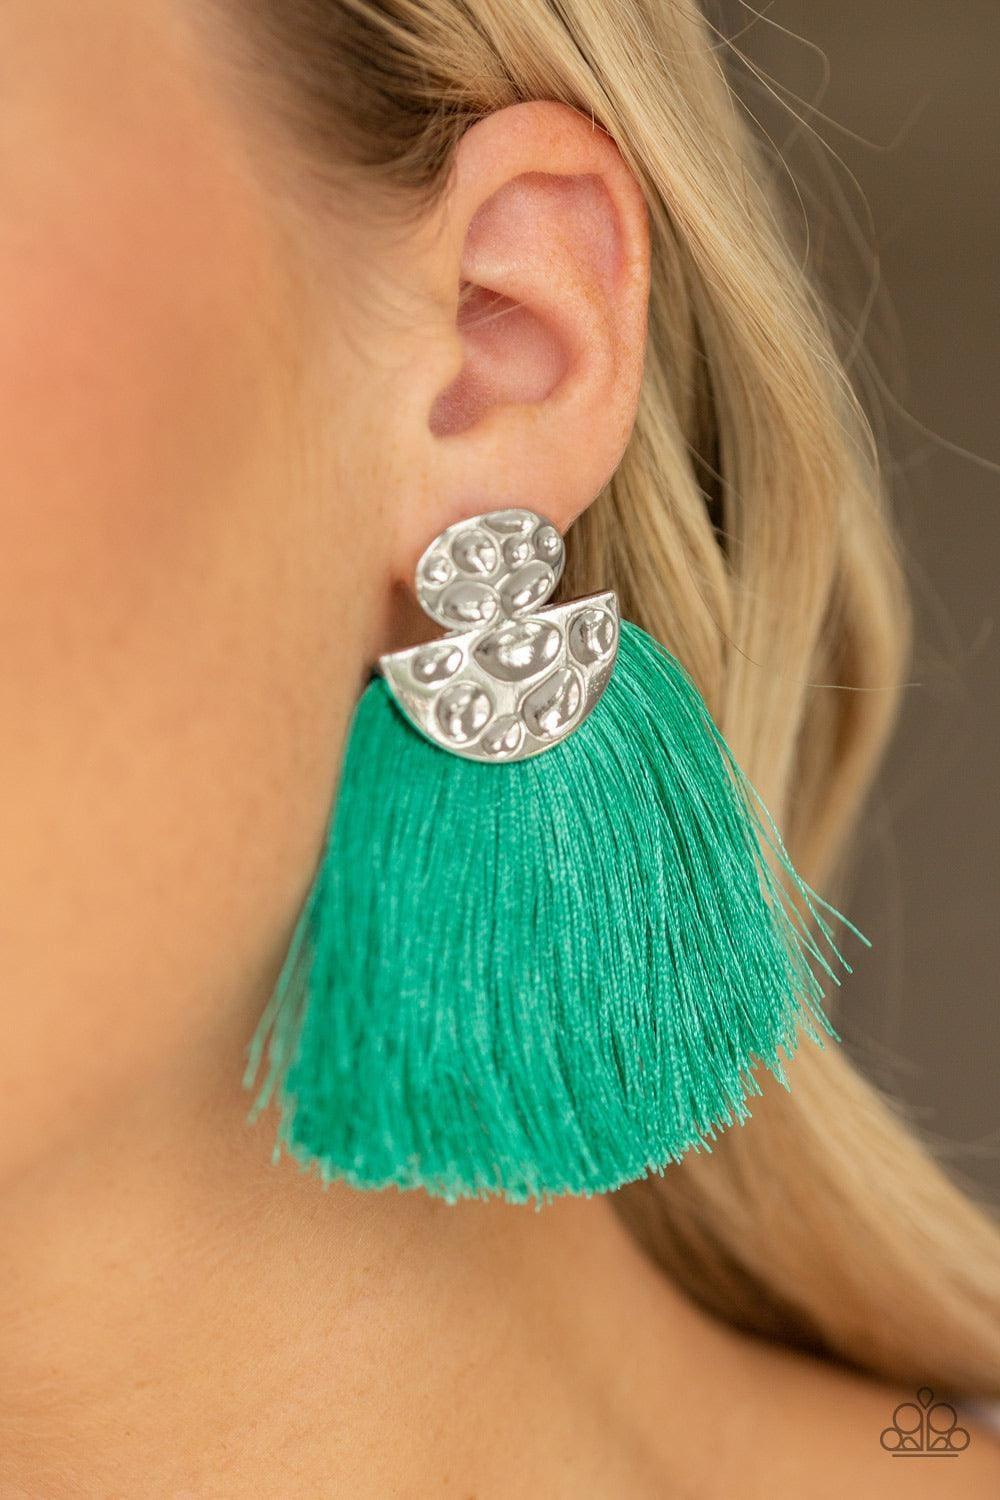 Paparazzi Accessories - Make Some Plume - Green Earrings - Bling by JessieK